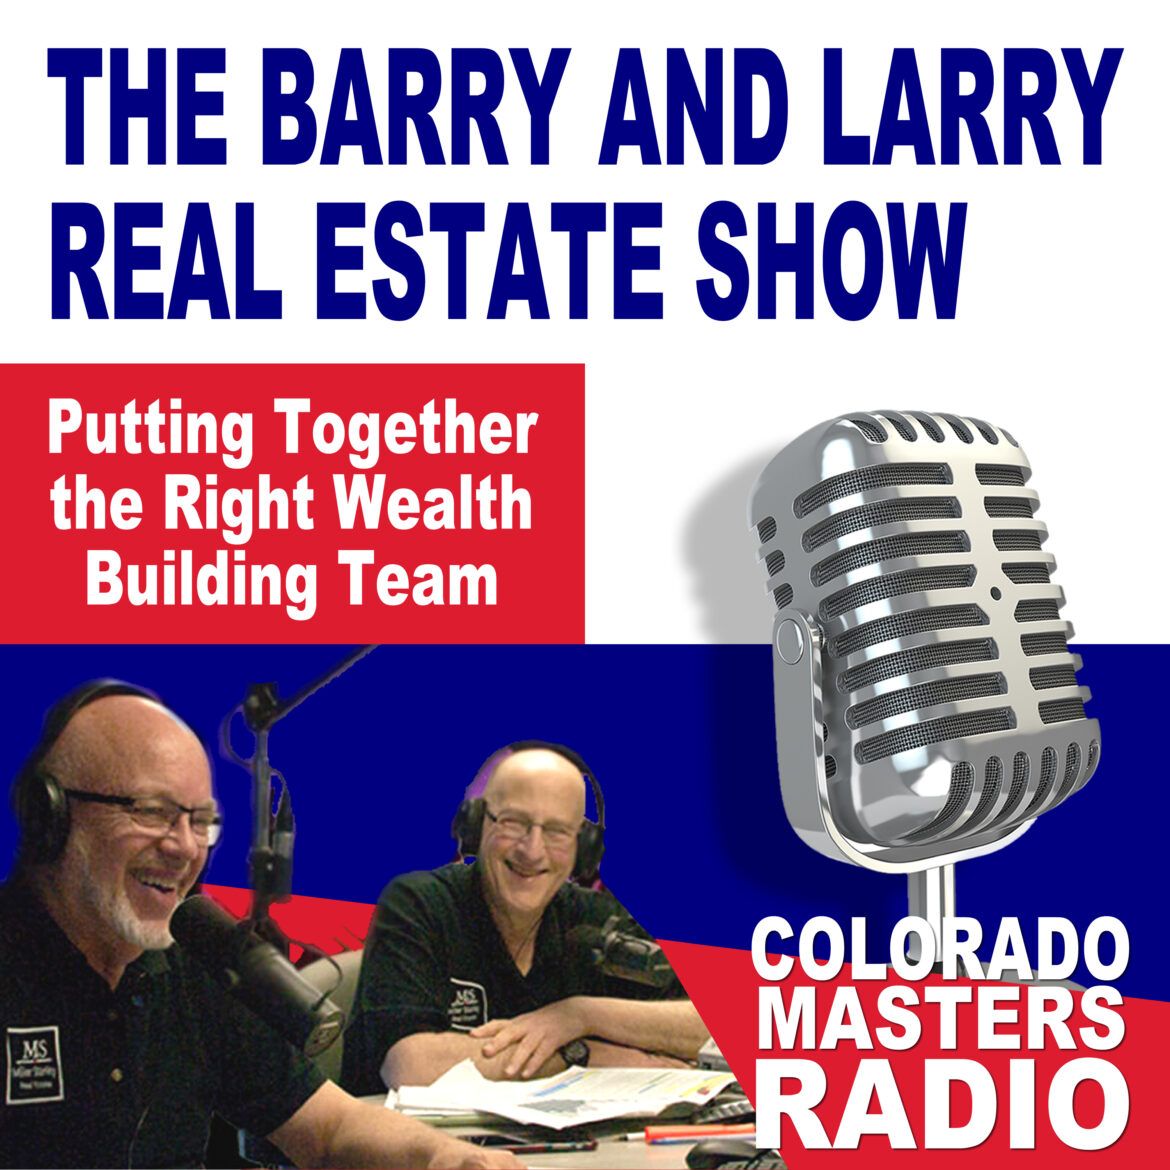 The Larry and Barry Real Estate Show - Putting Together the Right Wealth Building Team